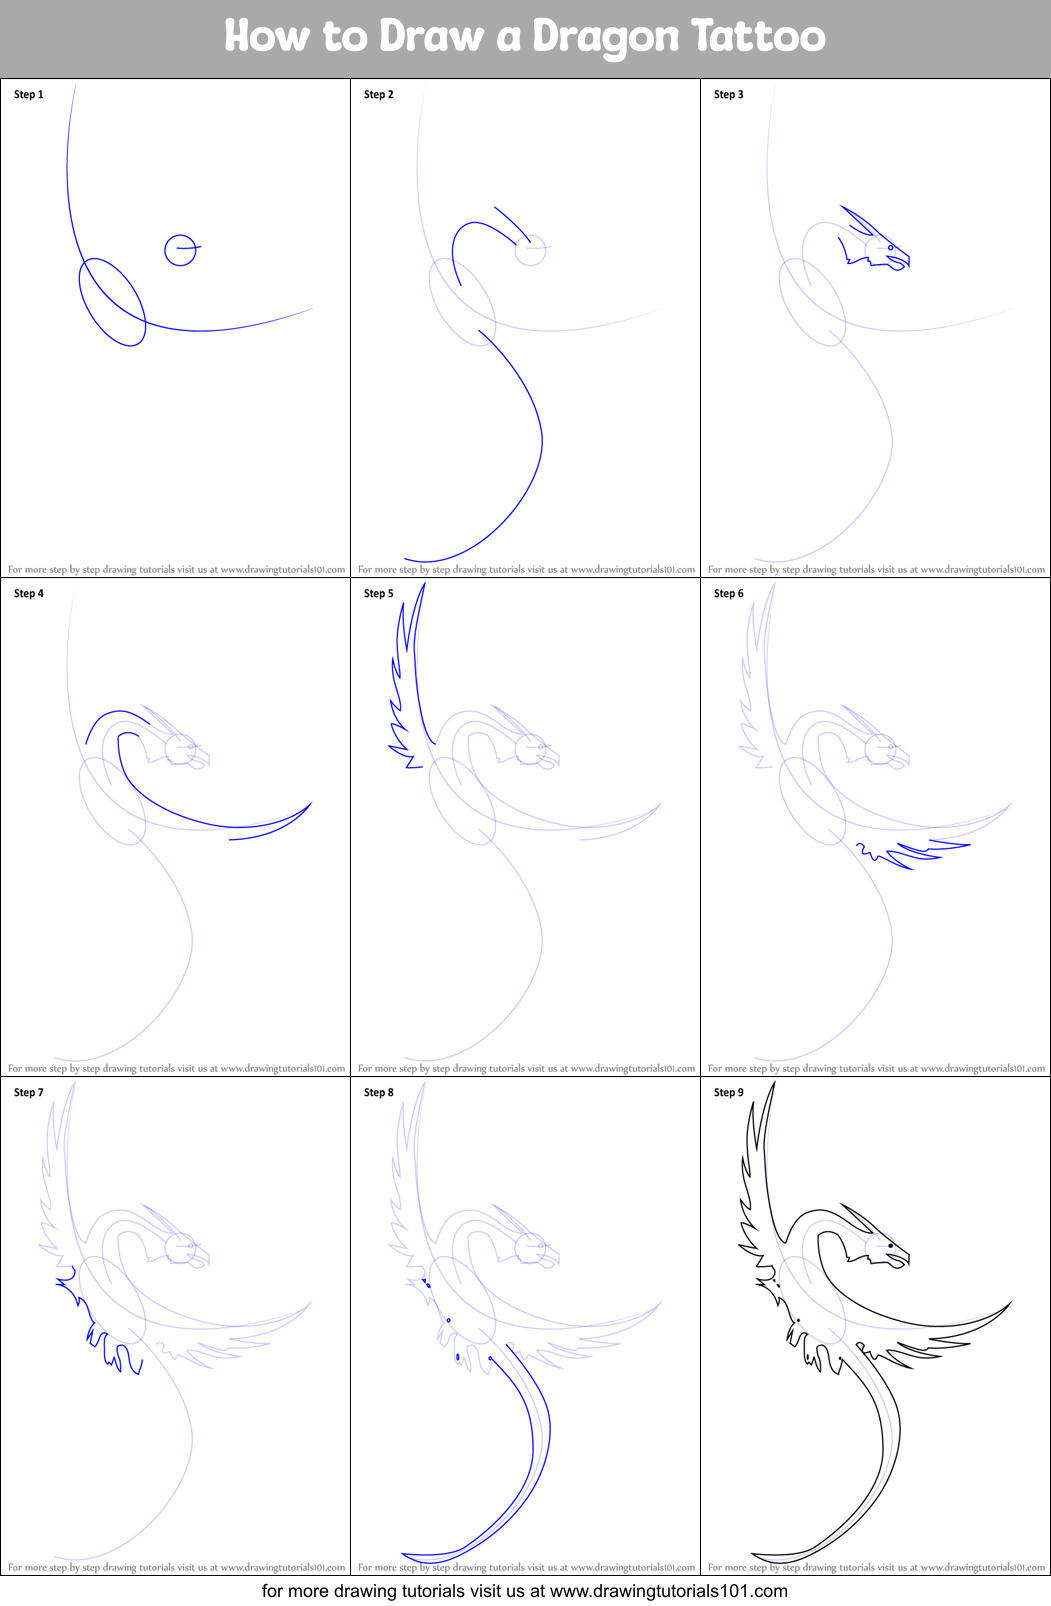 How to Draw a Dragon Tattoo printable step by step drawing sheet : DrawingTutorials101.com